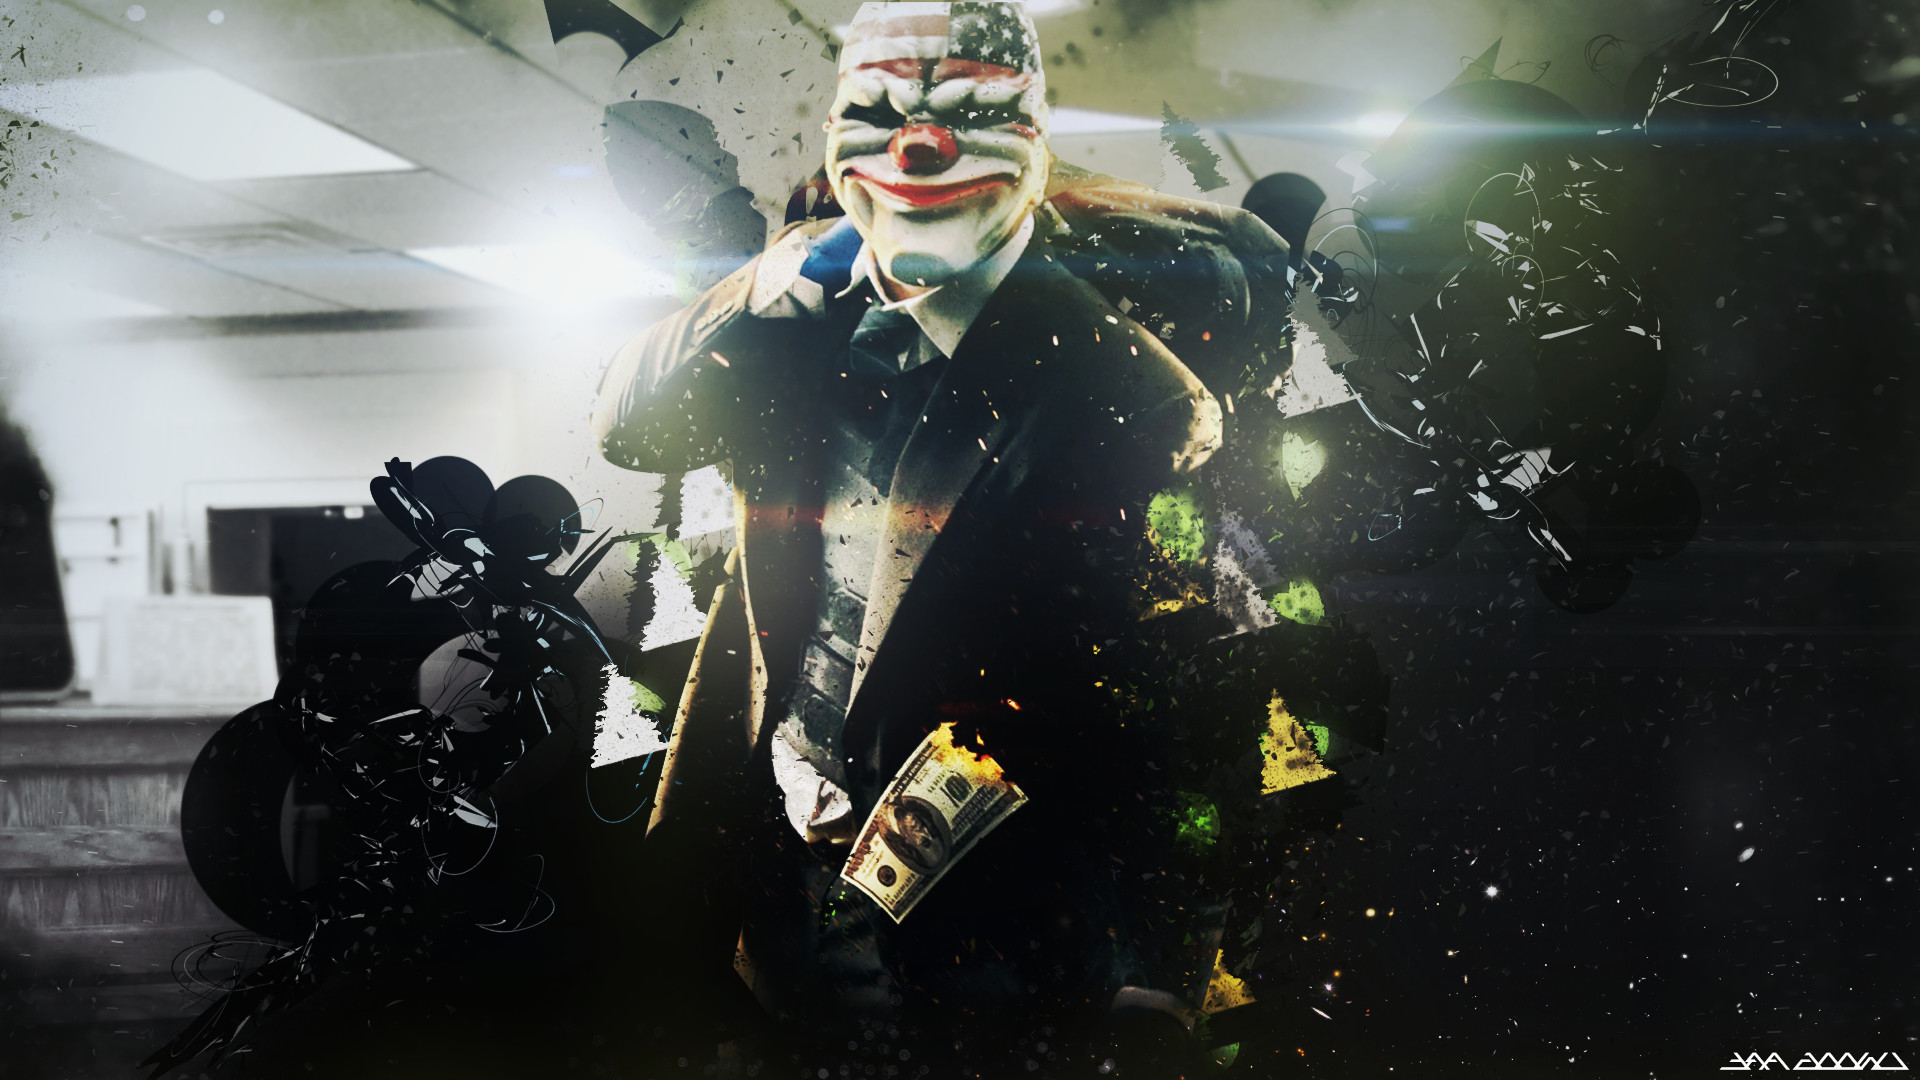 1920x1080 ... 92 Payday HD Wallpapers | Backgrounds - Wallpaper Abyss ...